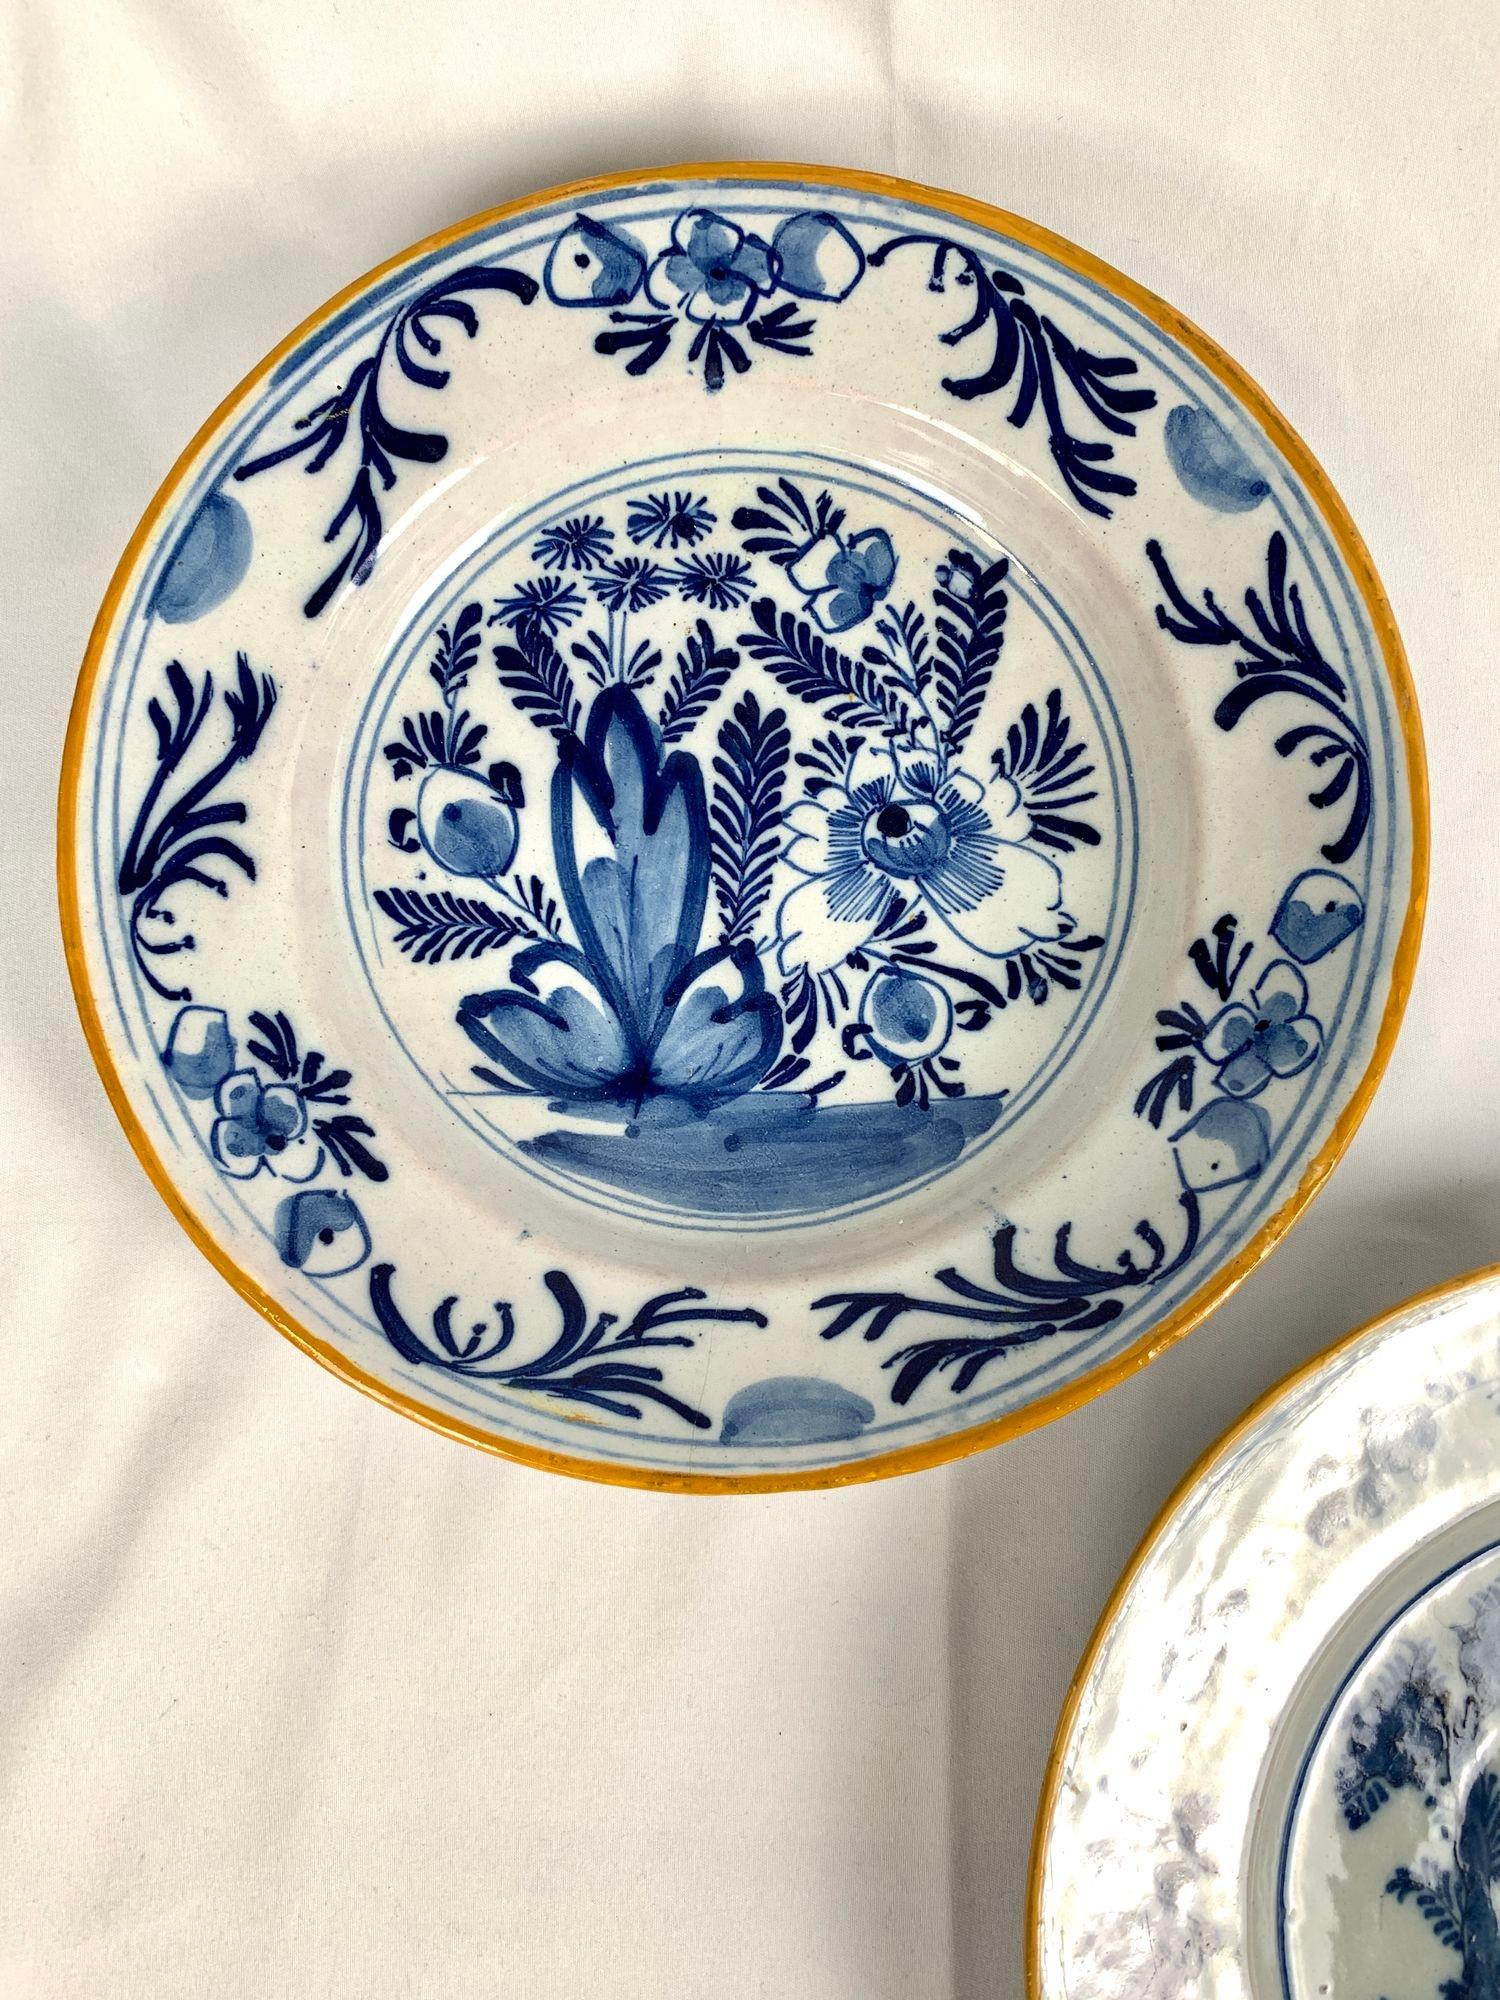 These five blue and white Delft plates were hand painted in the Netherlands, circa 1800.
The lovely plate in the center shows a deer resting in the forest.
The two pairs of plates around it show beautiful garden scenes with a traditional Dutch